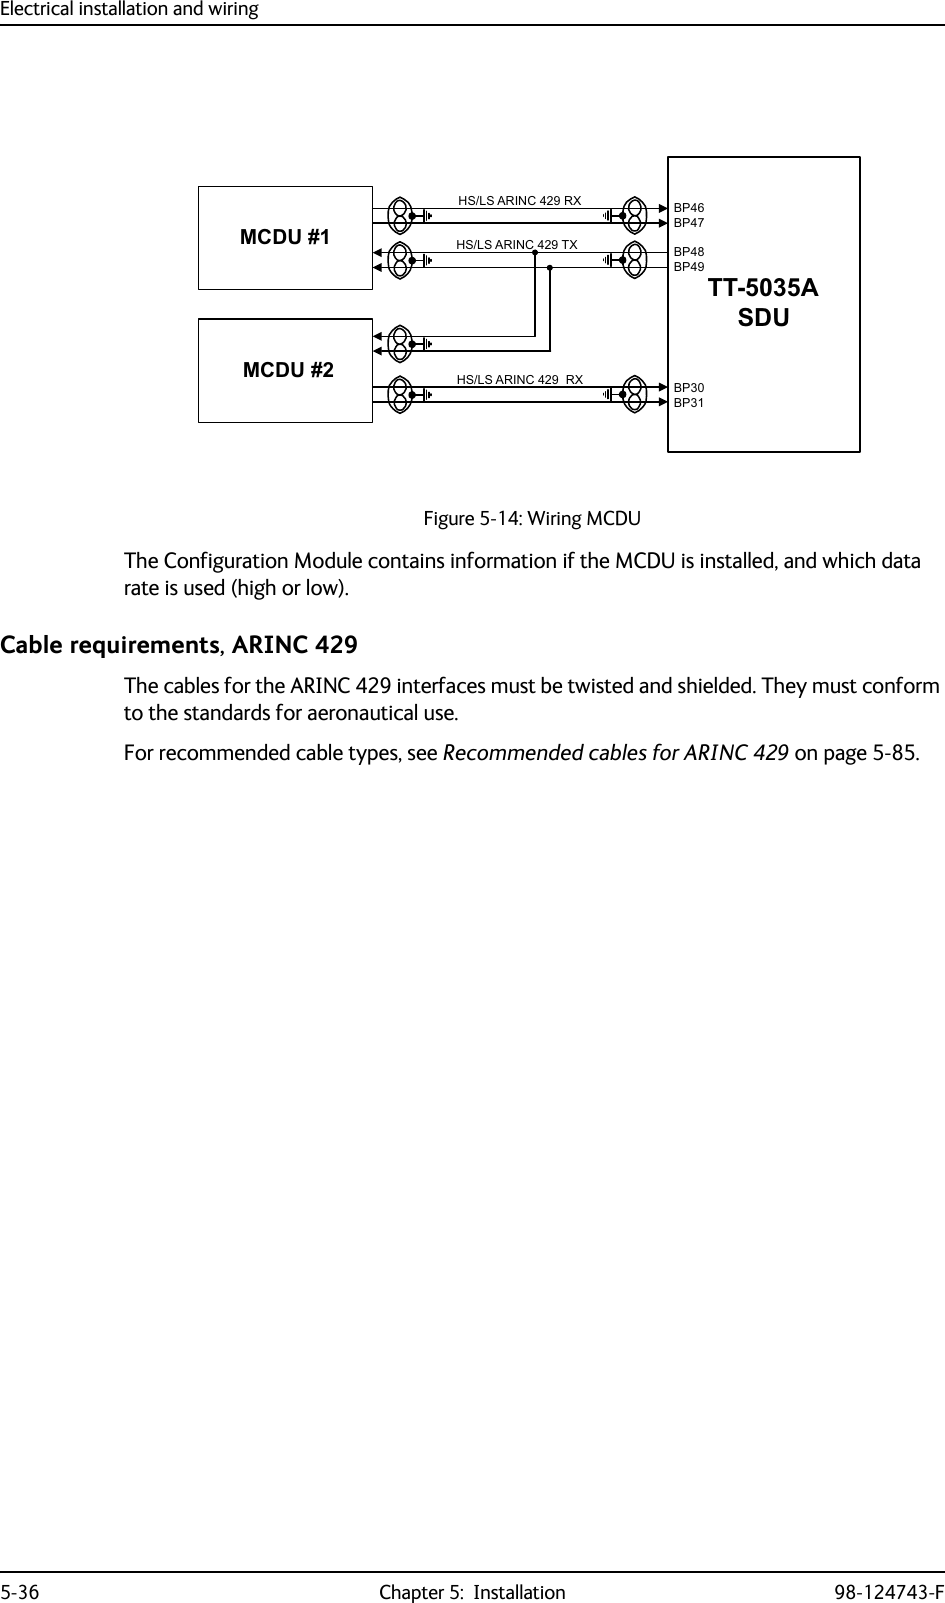 Electrical installation and wiring5-36 Chapter 5:  Installation 98-124743-FThe Configuration Module contains information if the MCDU is installed, and which data rate is used (high or low). Cable requirements, ARINC 429The cables for the ARINC 429 interfaces must be twisted and shielded. They must conform to the standards for aeronautical use.For recommended cable types, see Recommended cables for ARINC 429 on page 5-85.Figure 5-14: Wiring MCDU77$6&apos;80&amp;&apos;8+6/6$5,1&amp;5;0&amp;&apos;8+6/6$5,1&amp;5; %3%3%3%3%3%3+6/6$5,1&amp;7;